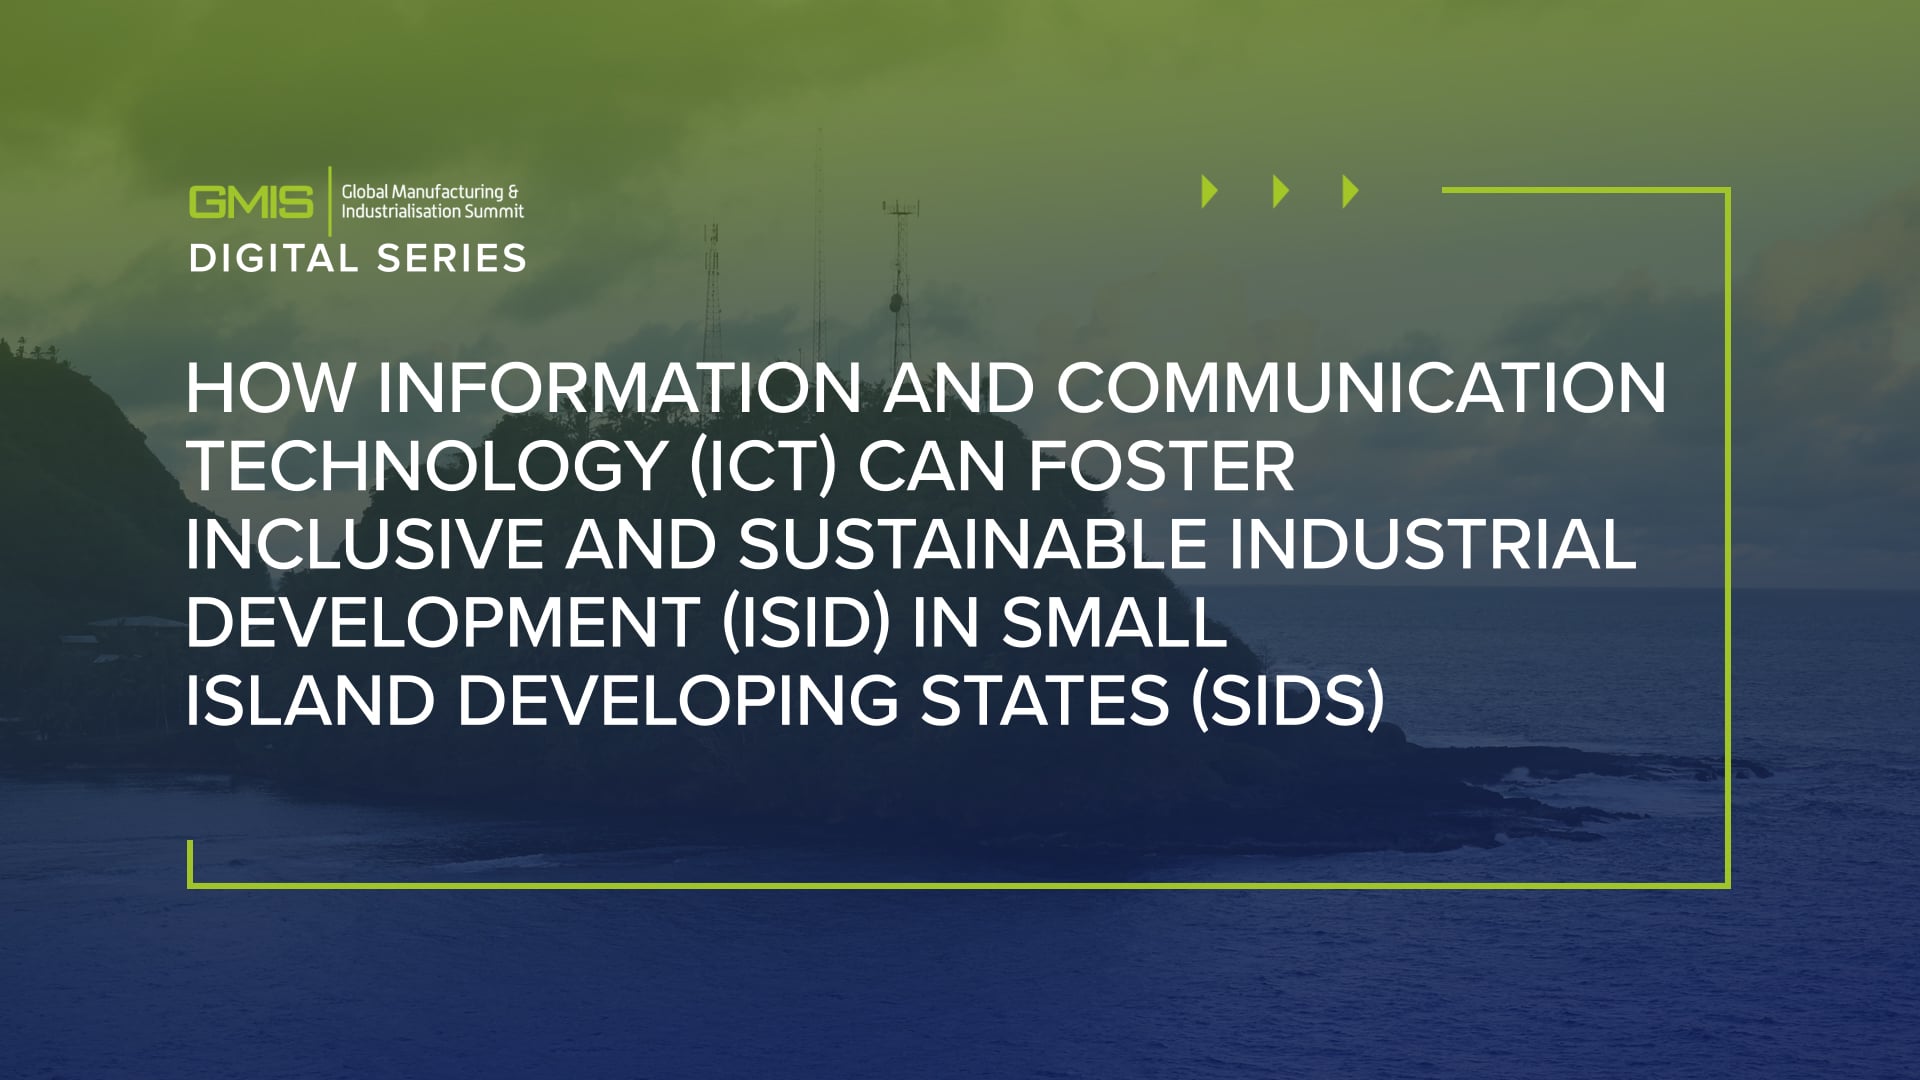 How Information and Communication Technology (ICT) can foster Inclusive and Sustainable Industrial Development (ISID) in Small Island Developing States (SIDS)